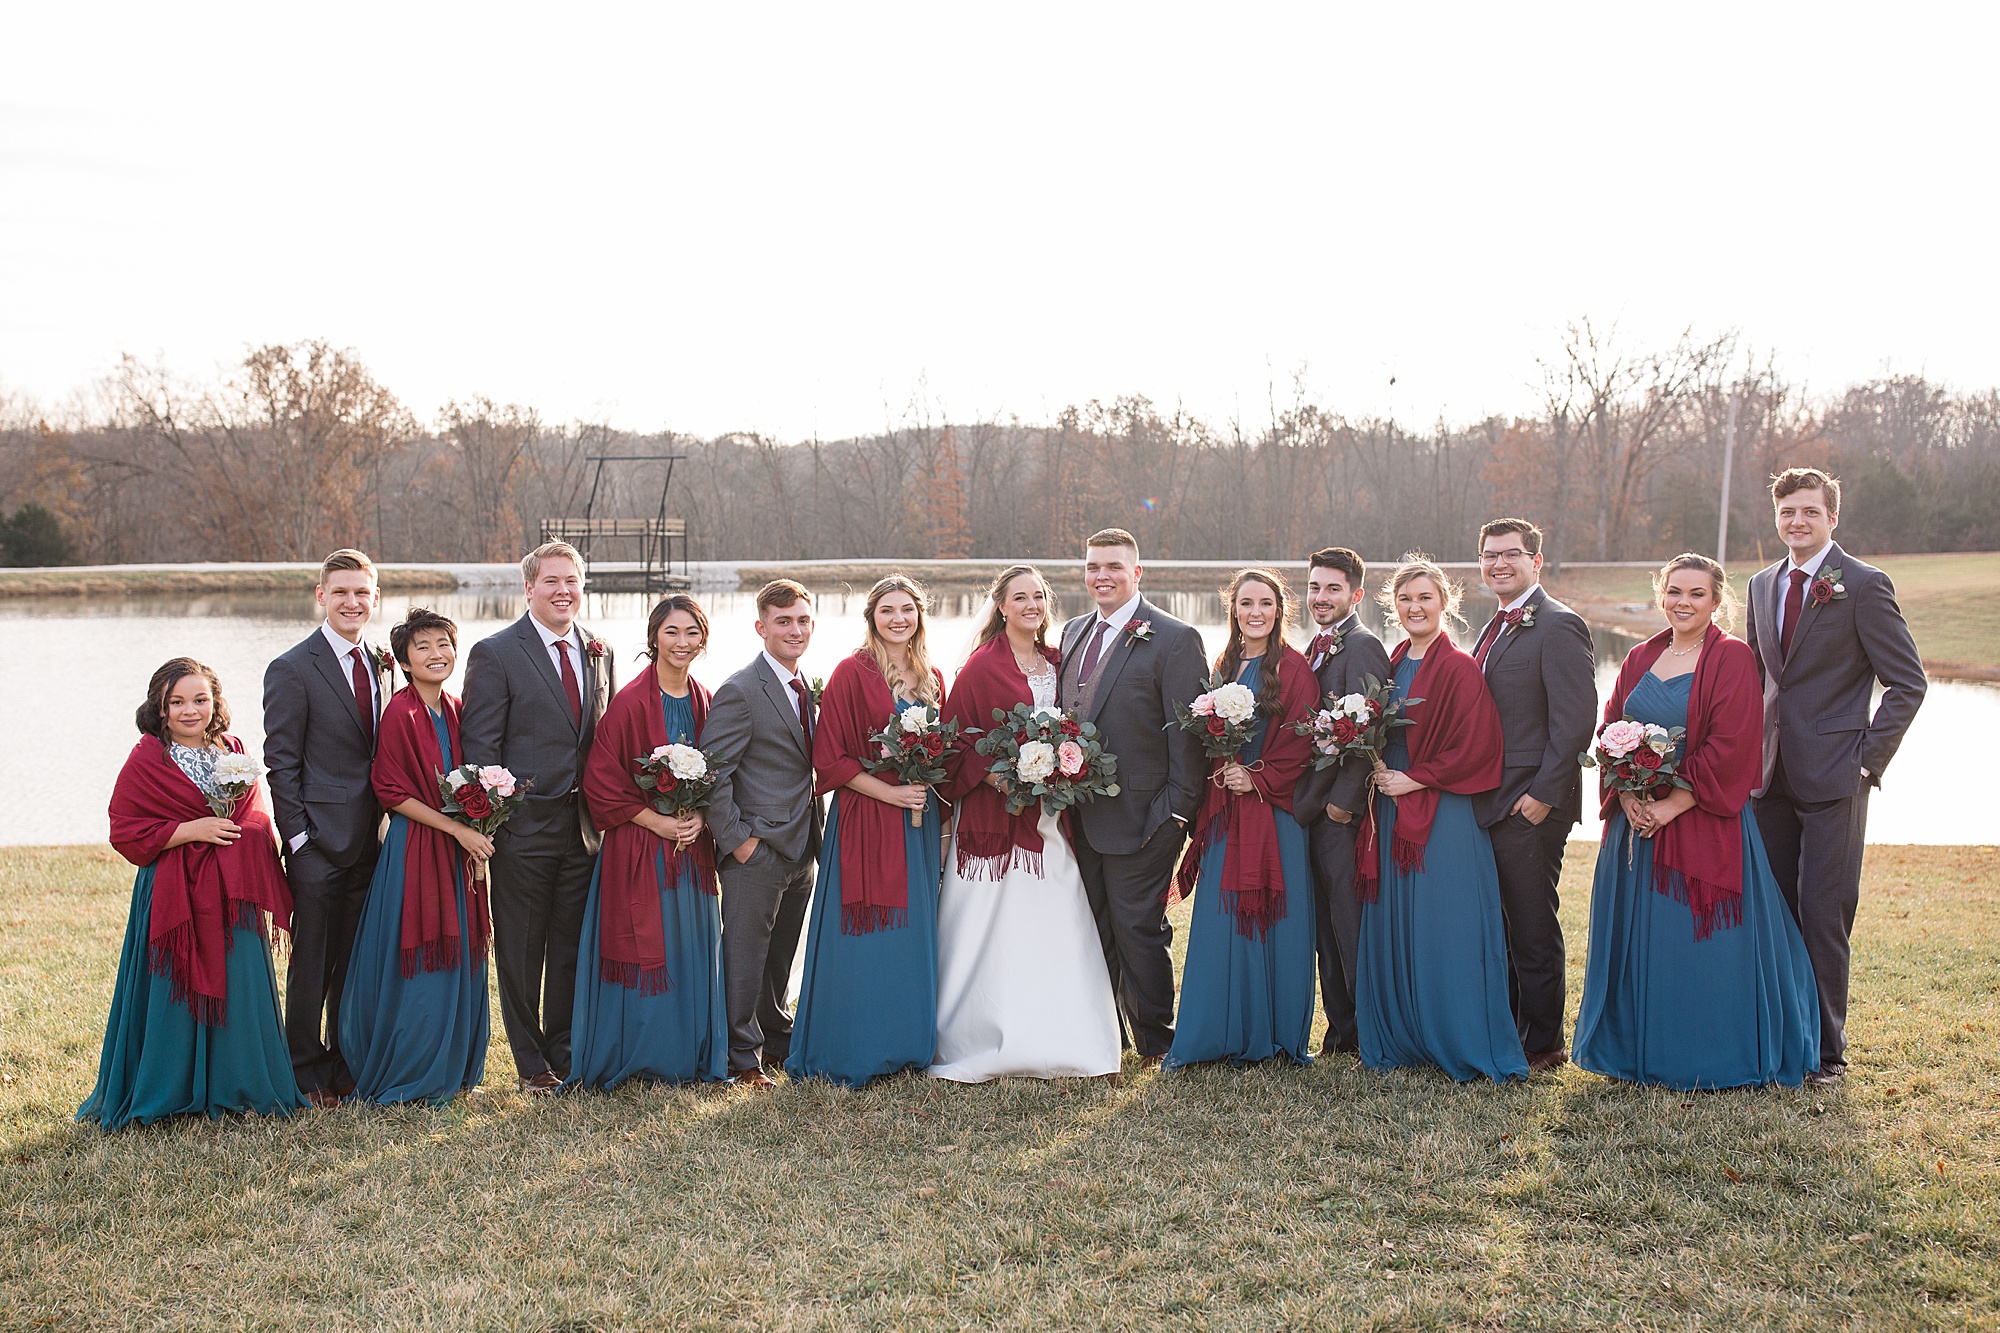 bride and groom pose with wedding party in teal gowns with red wraps and grey suits